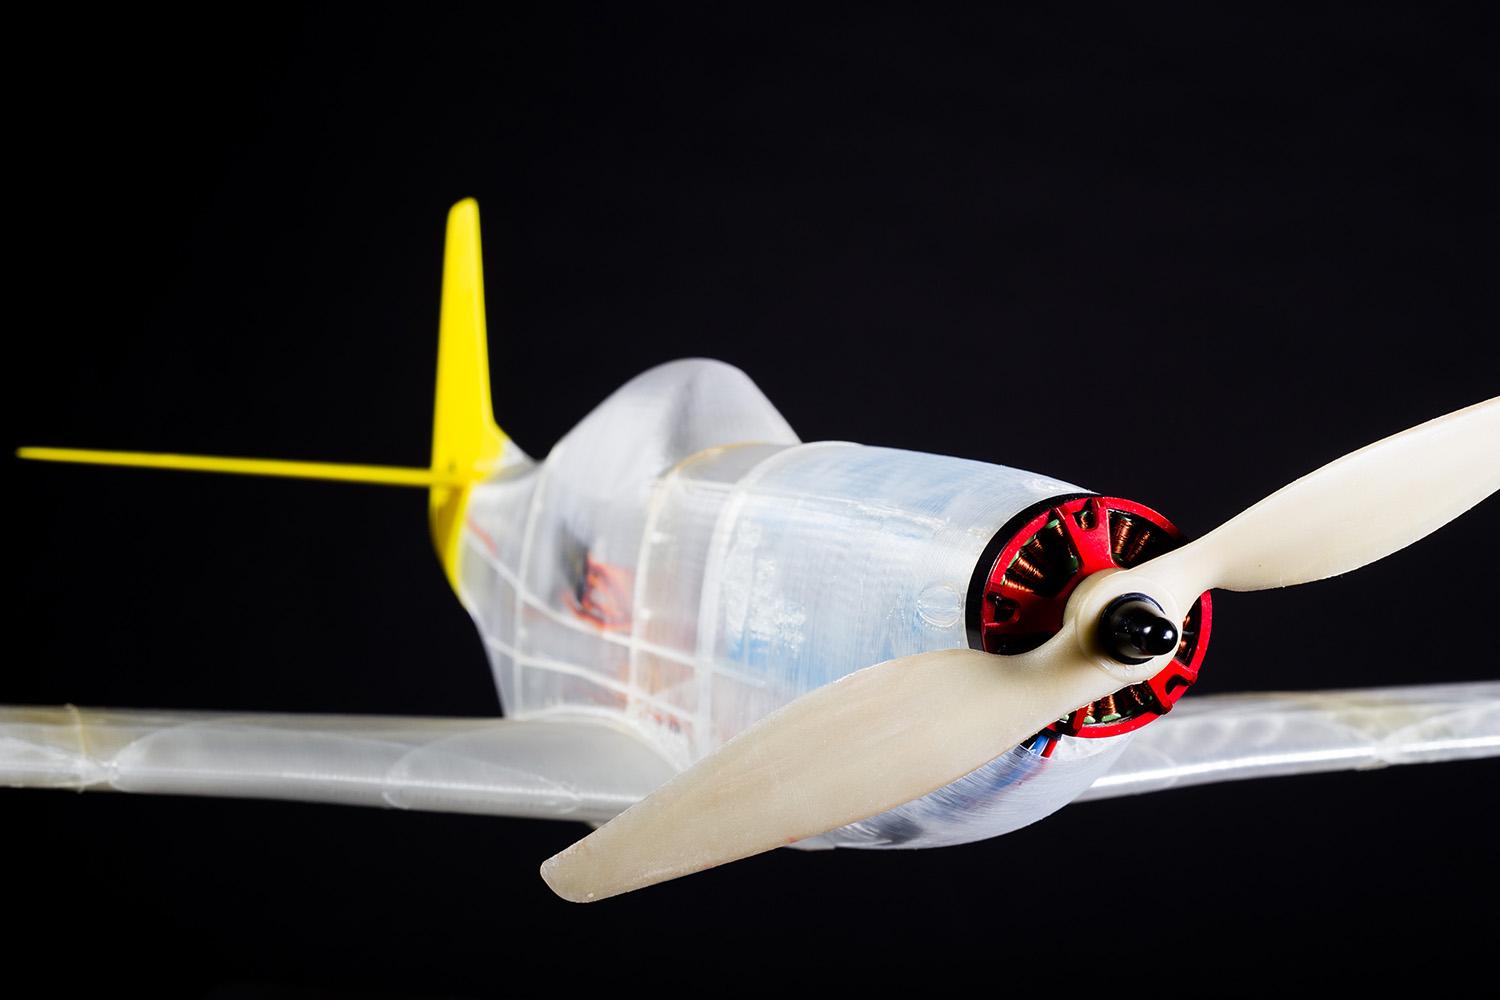 3d-labprint-releases-fully-printable-p51-d-mustang-model-airplane